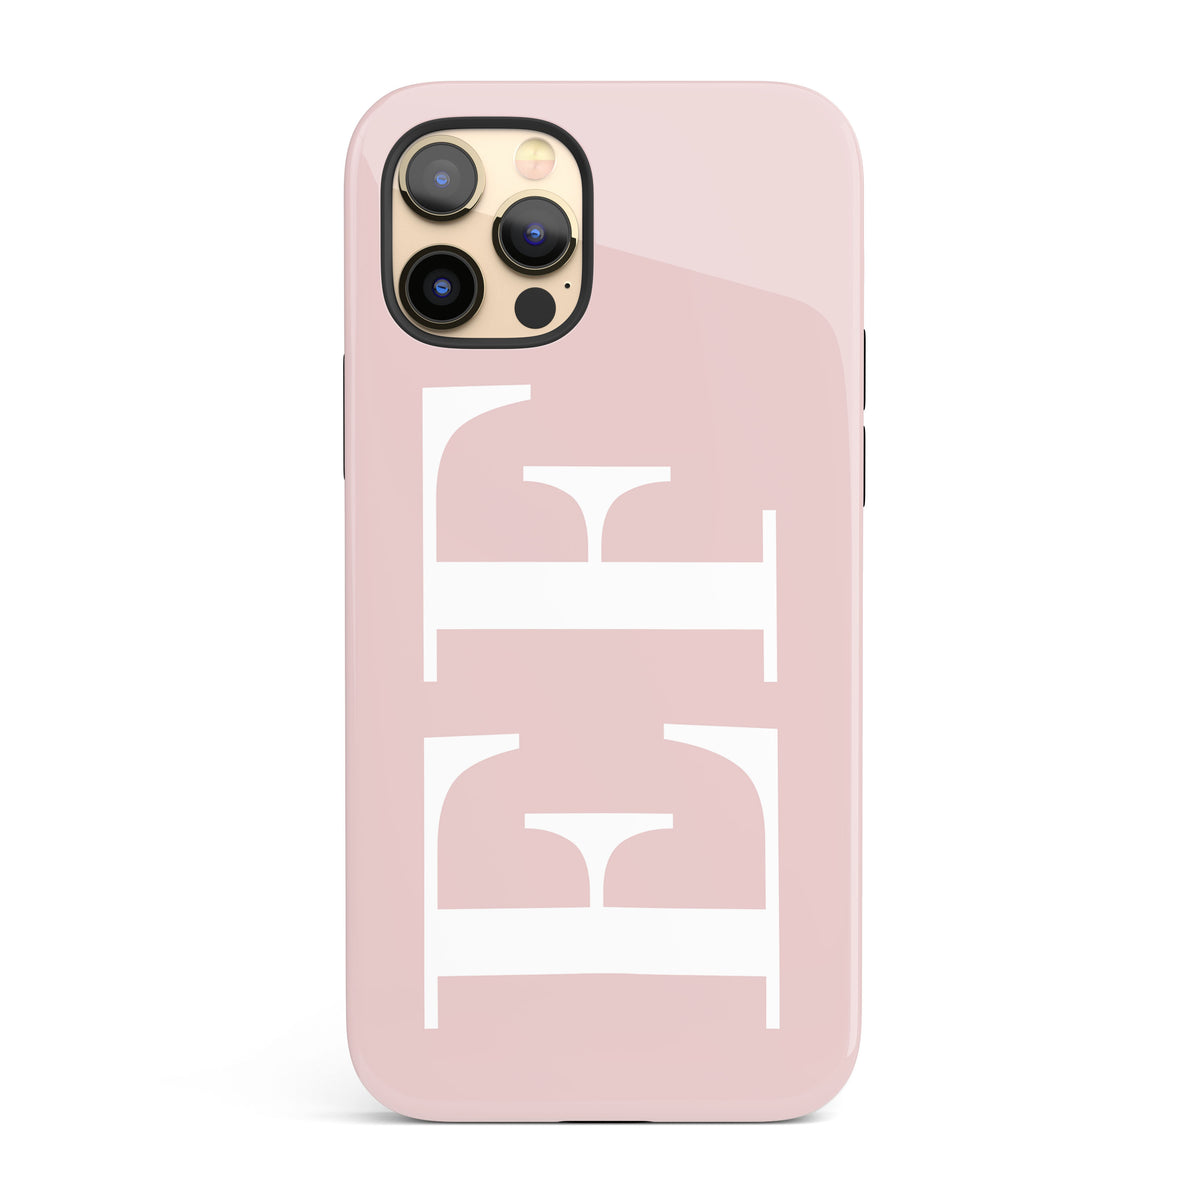 The Personalised Initials Case - White & Dusky Pink Edition